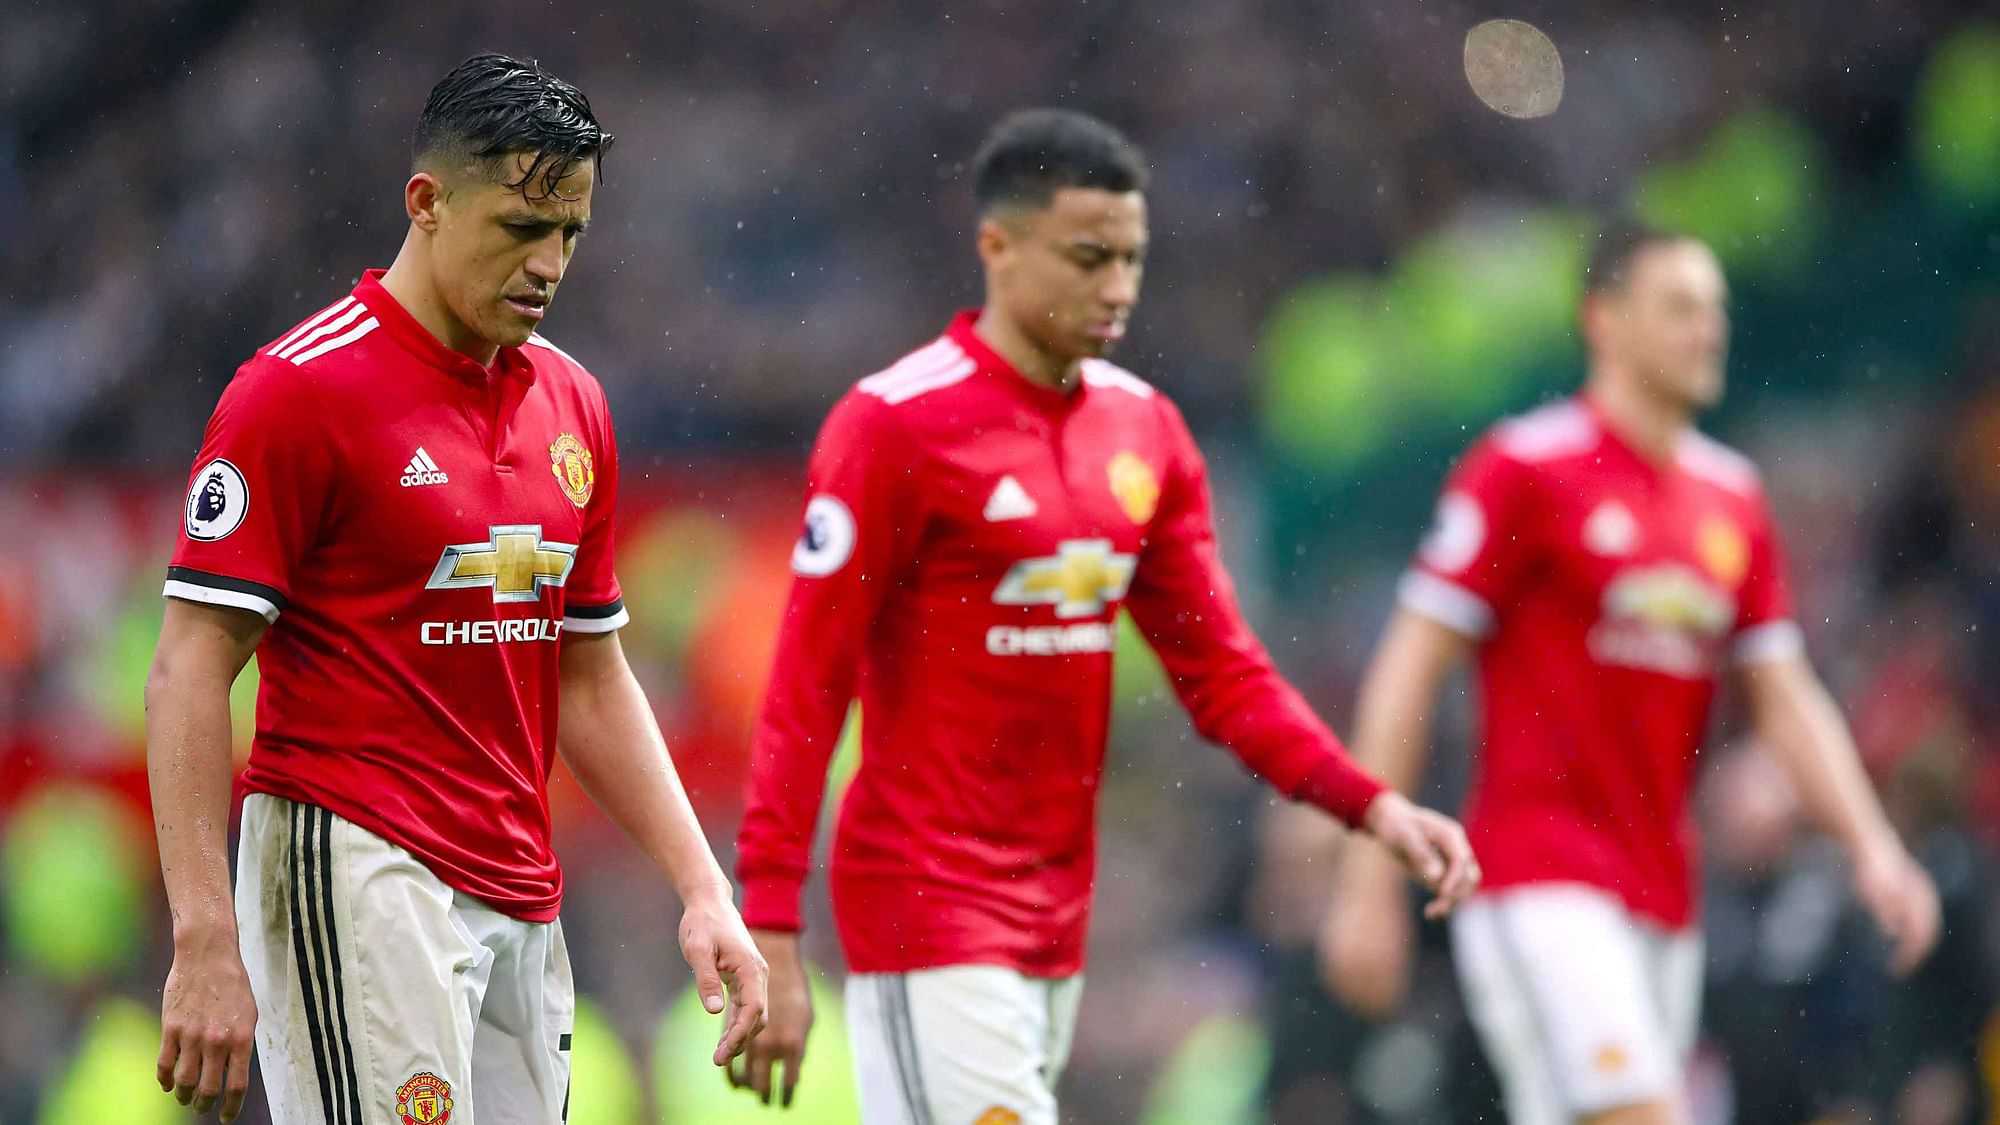 Manchester United’s Alexis Sanchez, left, leaves the pitch dejected after the final whistle during the English Premier League soccer match against West Bromwich Albion.